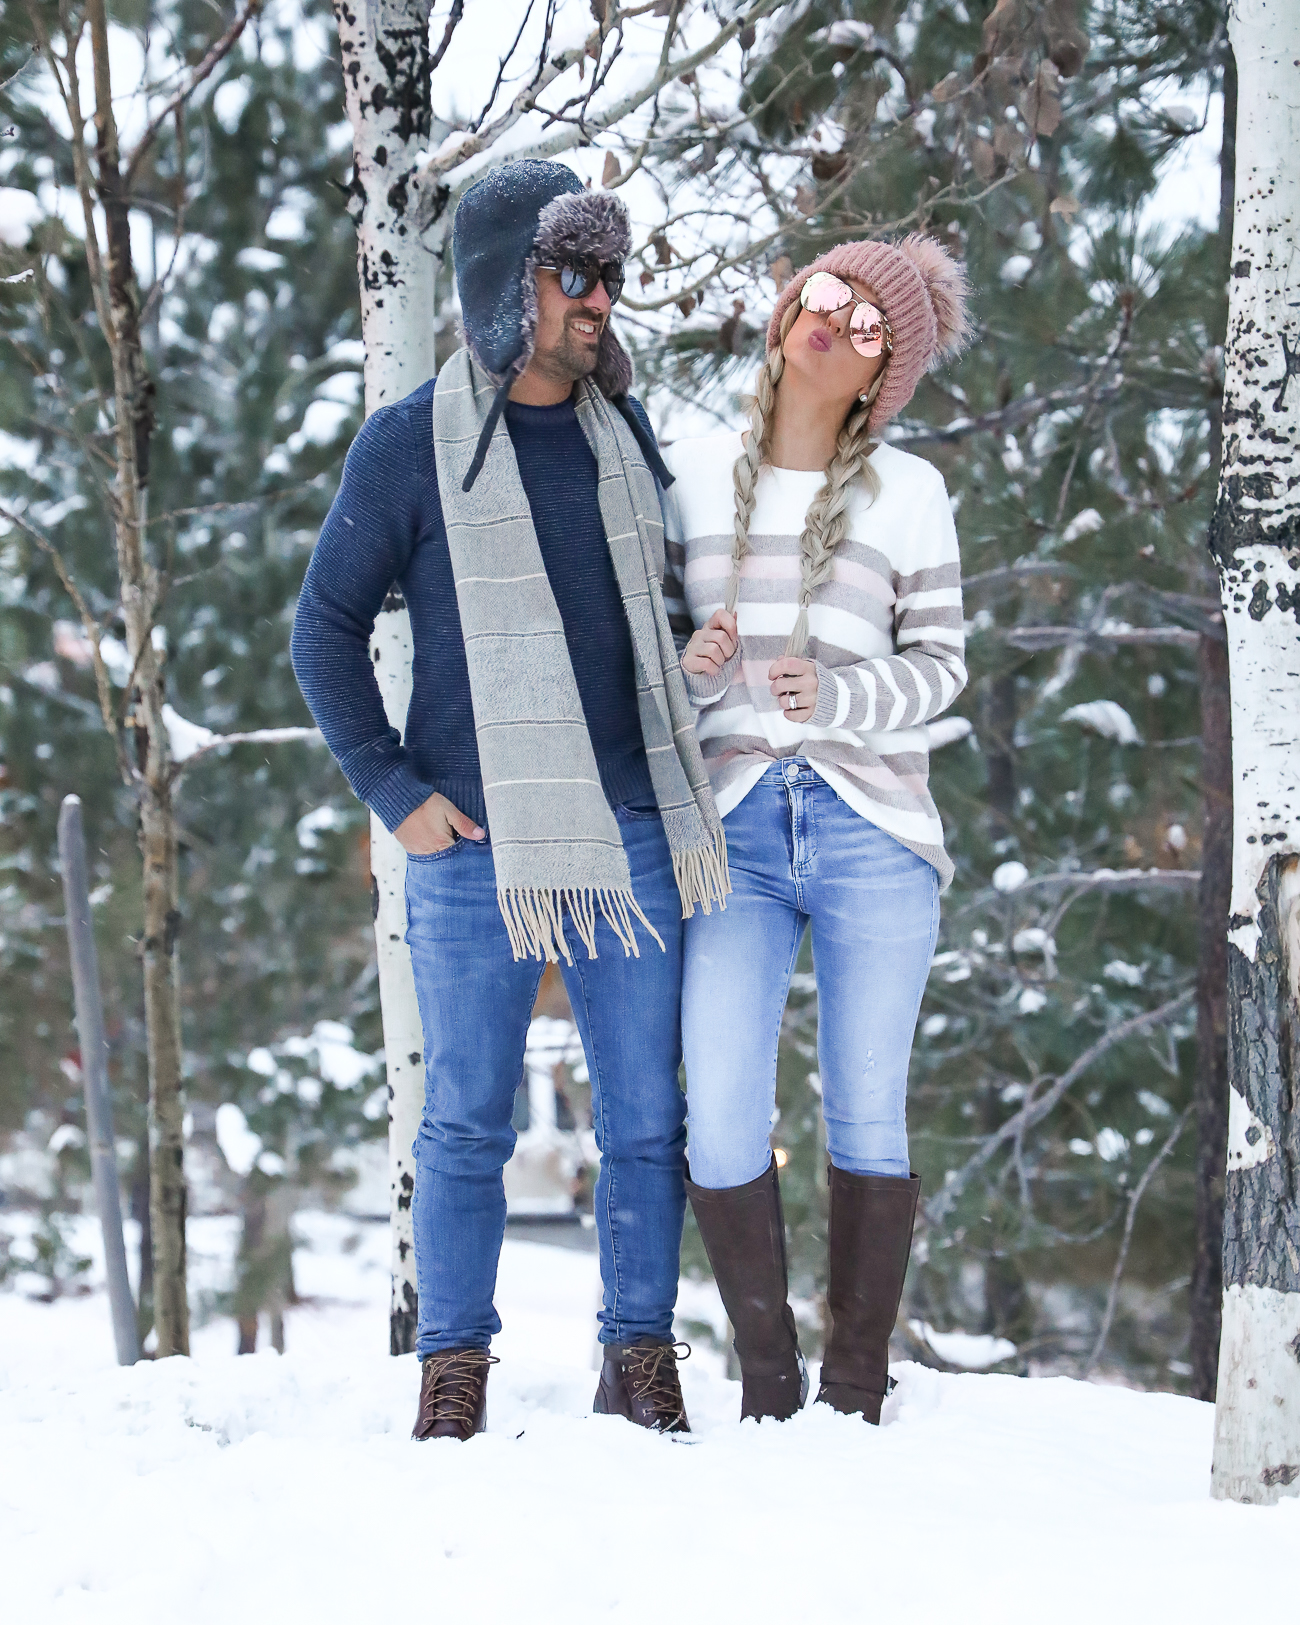 Zappos Rockport Christy Boots His & hers Couple winter outfit ideas Lake Tahoe NorthStar Resort Laura Beverlin -19